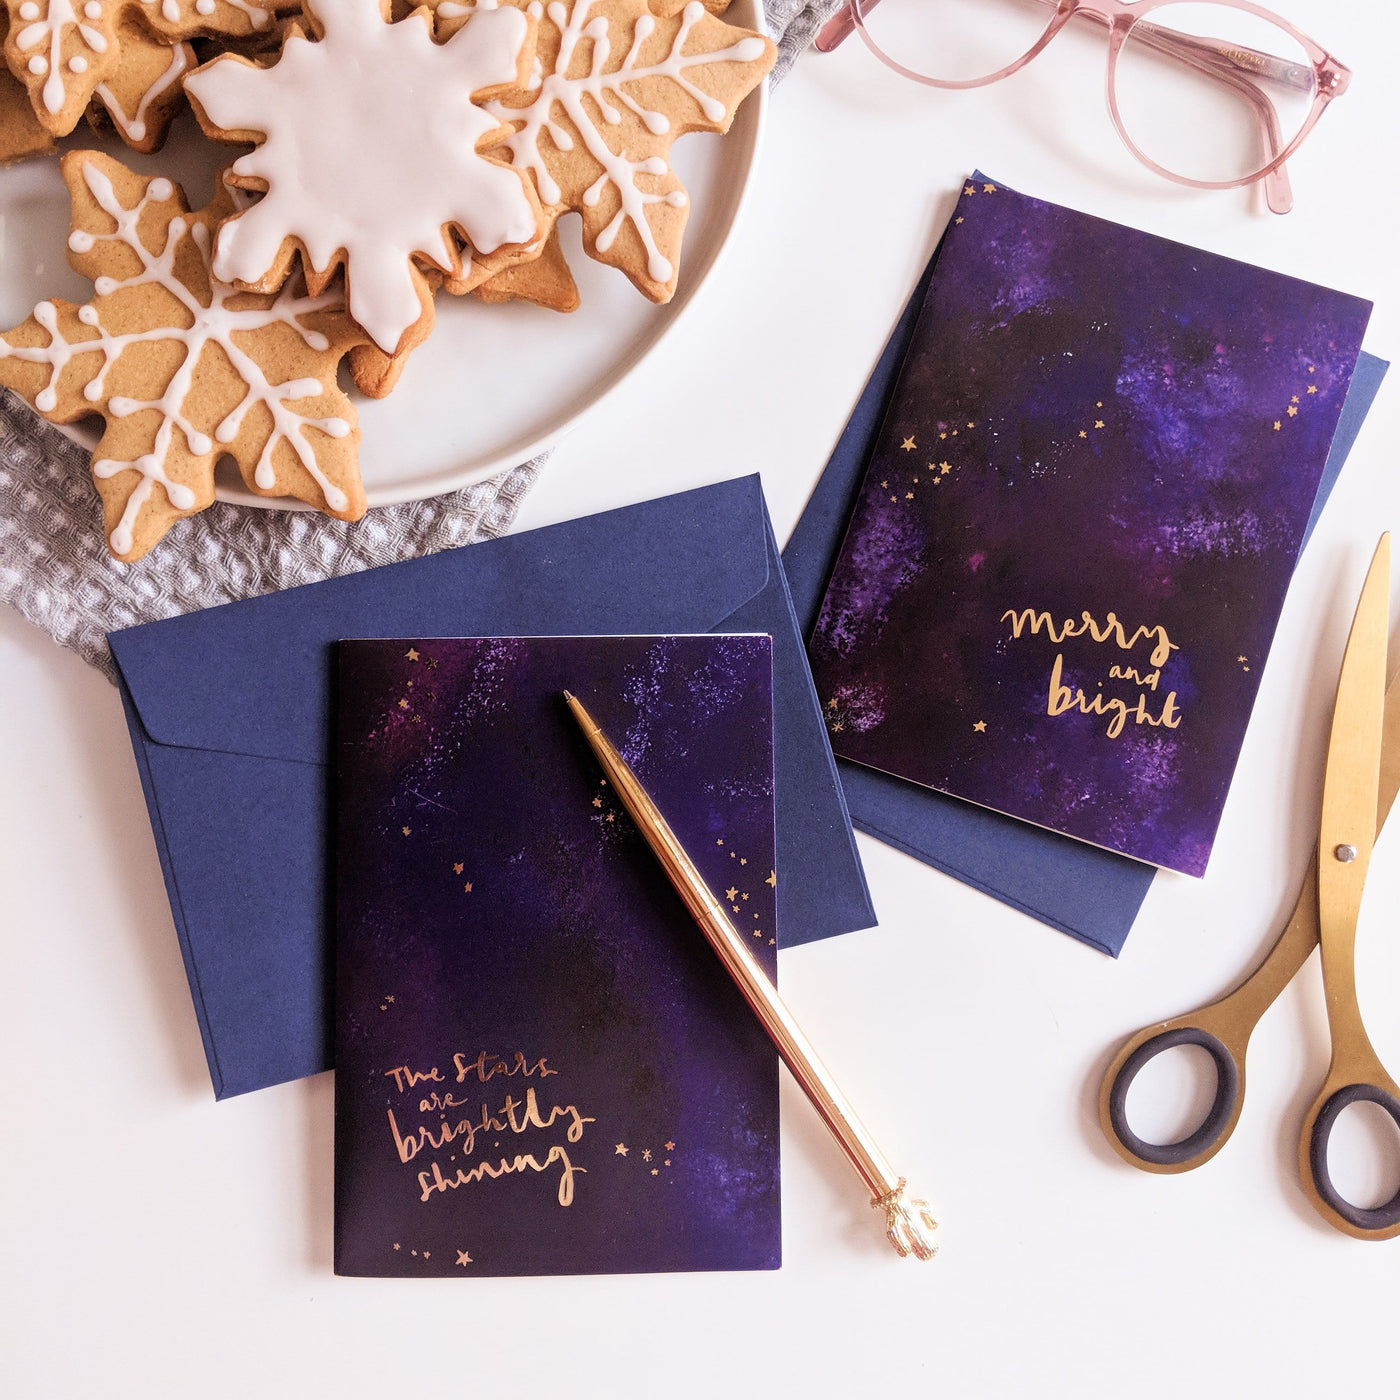 Purple Galaxy Christmas Card With The Words Merry An Bright In Gold With A Deep Navy Envelope Coupled With Another Galaxy Christmas Card - Annie Dornan Smith